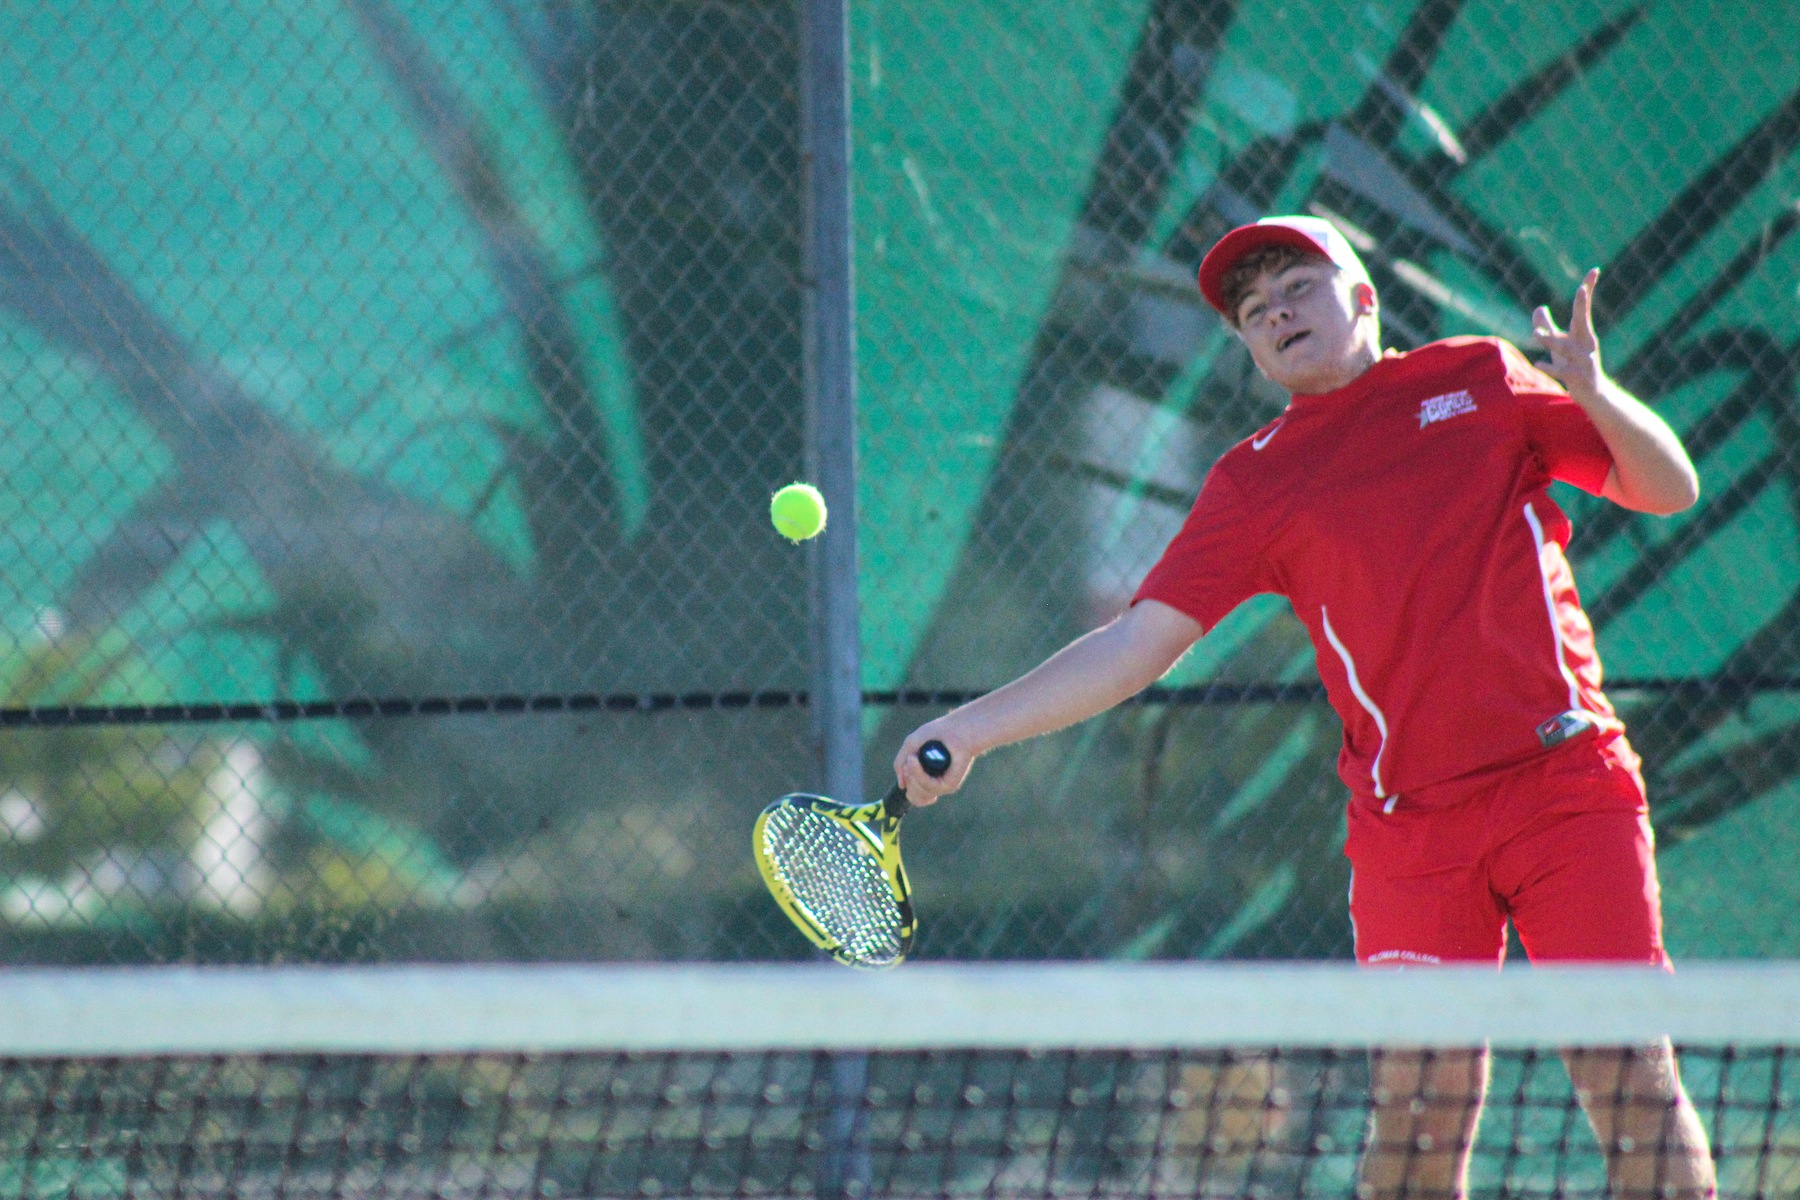 Nathan Buturla won his doubles and singles matches against Saddleback.